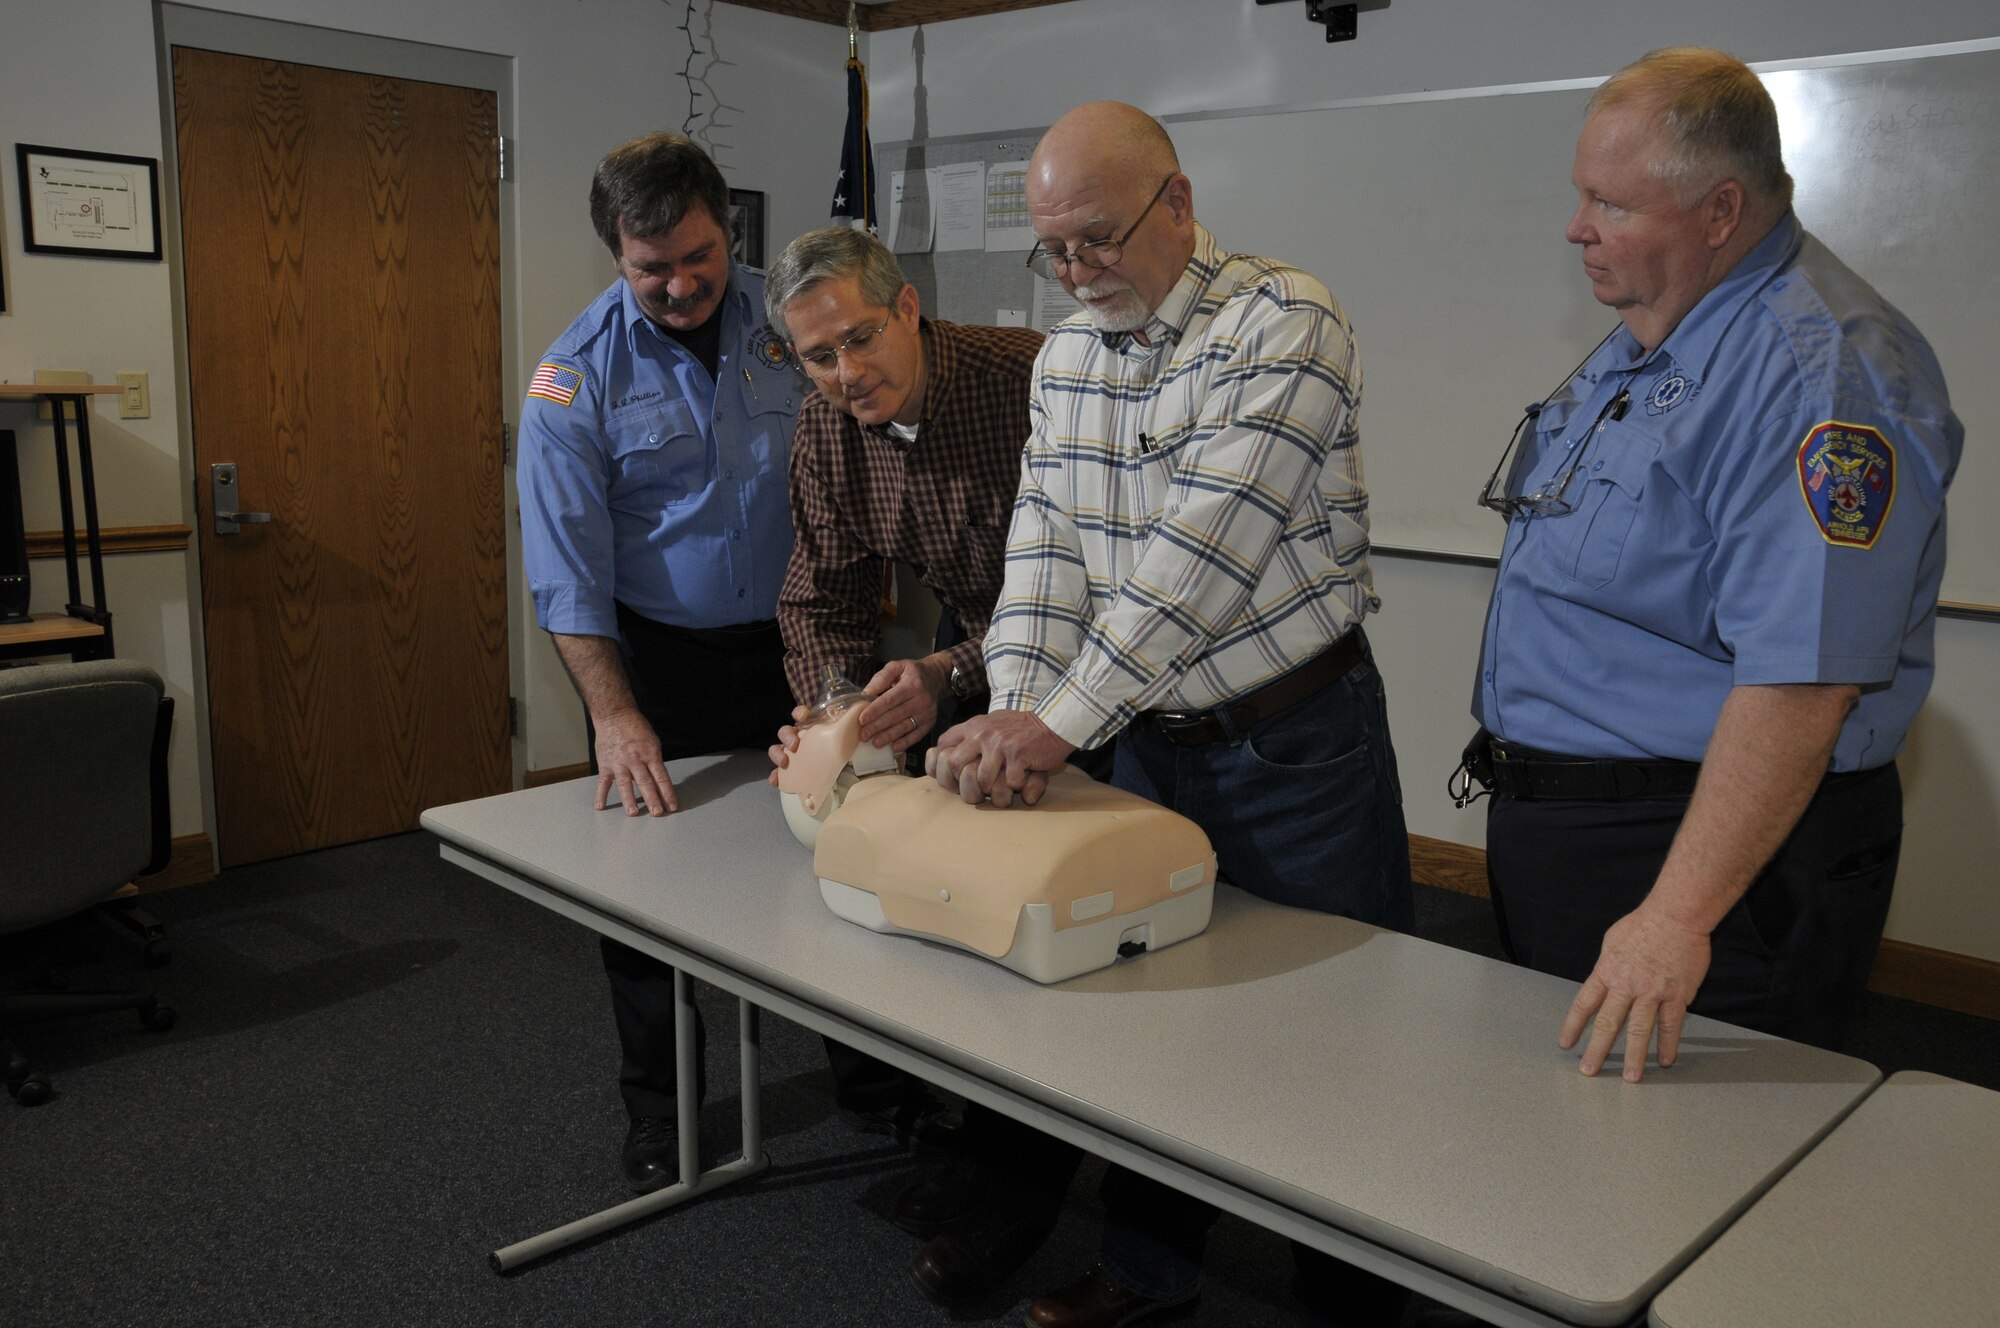 Far left and right Jim Phillips and Tim Mansfield, Aerospace Testing Alliance (ATA) paramedics with the Arnold Engineering Development Center Fire Department, watch as Precision Measurement Equipment Laboratory’s Dale West and Gary Fergus demonstrate how they administered cardiopulmonary resuscitation (CPR) to a coworker, Michael Bunch, Feb. 11. Phillips and Mansfield were the two EMTs who responded to the 911 call placed that day by Brad Pearson, an ATA instrument technician in the lab. Mansfield is also a CPR instructor on base. Doctors told Bunch he should be able to return to work in about three weeks. (Photo by Rick Goodfriend)